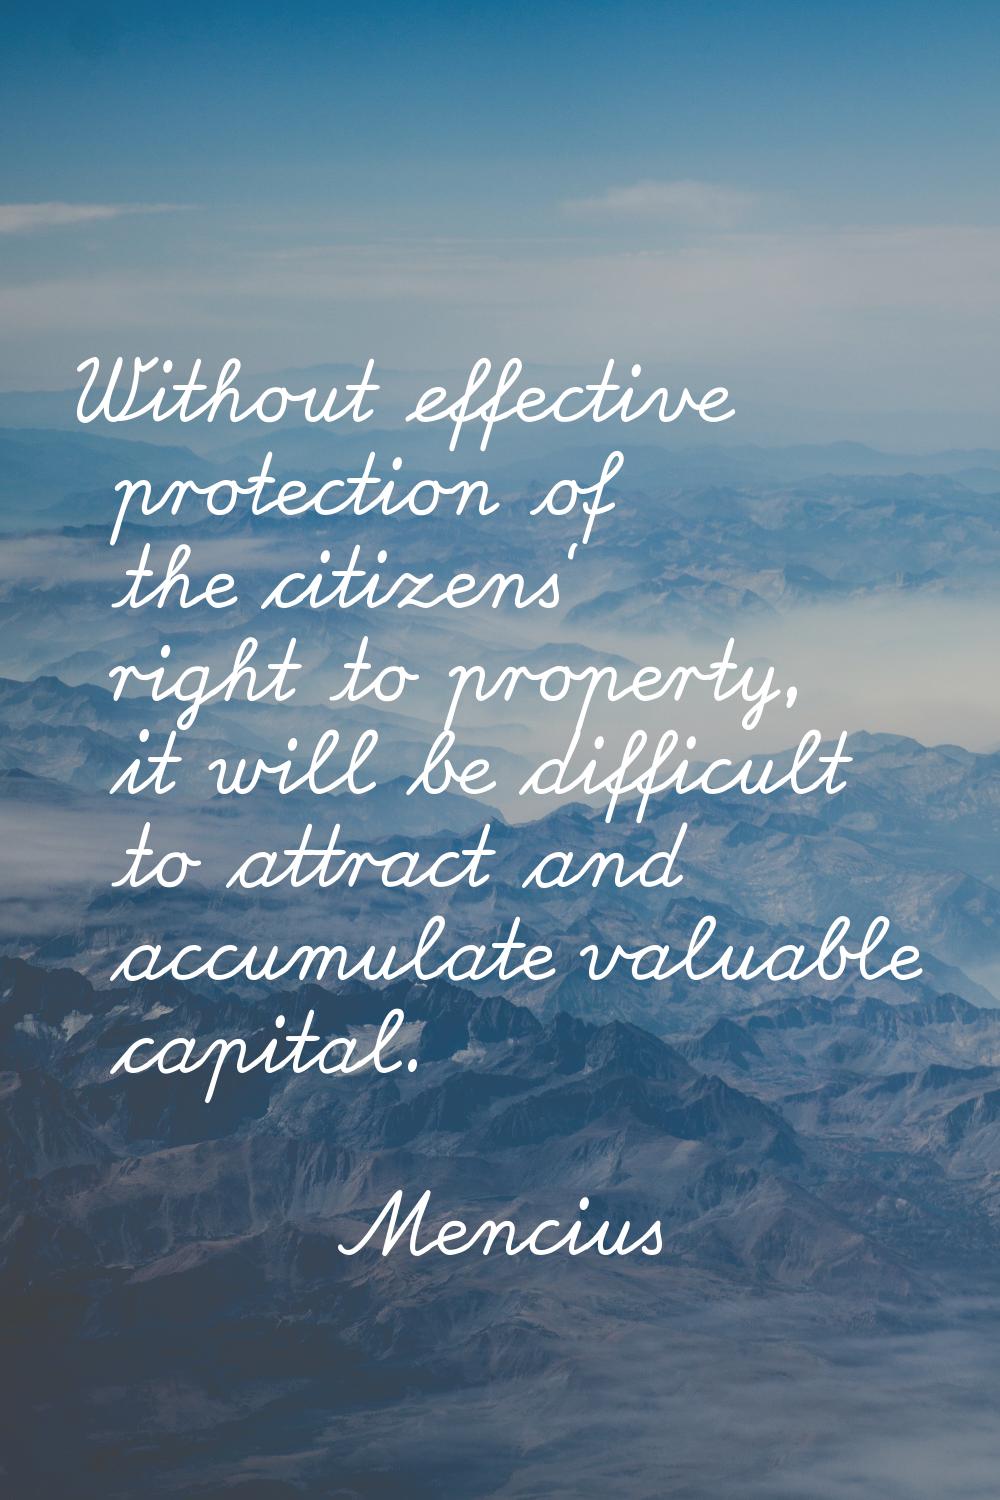 Without effective protection of the citizens' right to property, it will be difficult to attract an